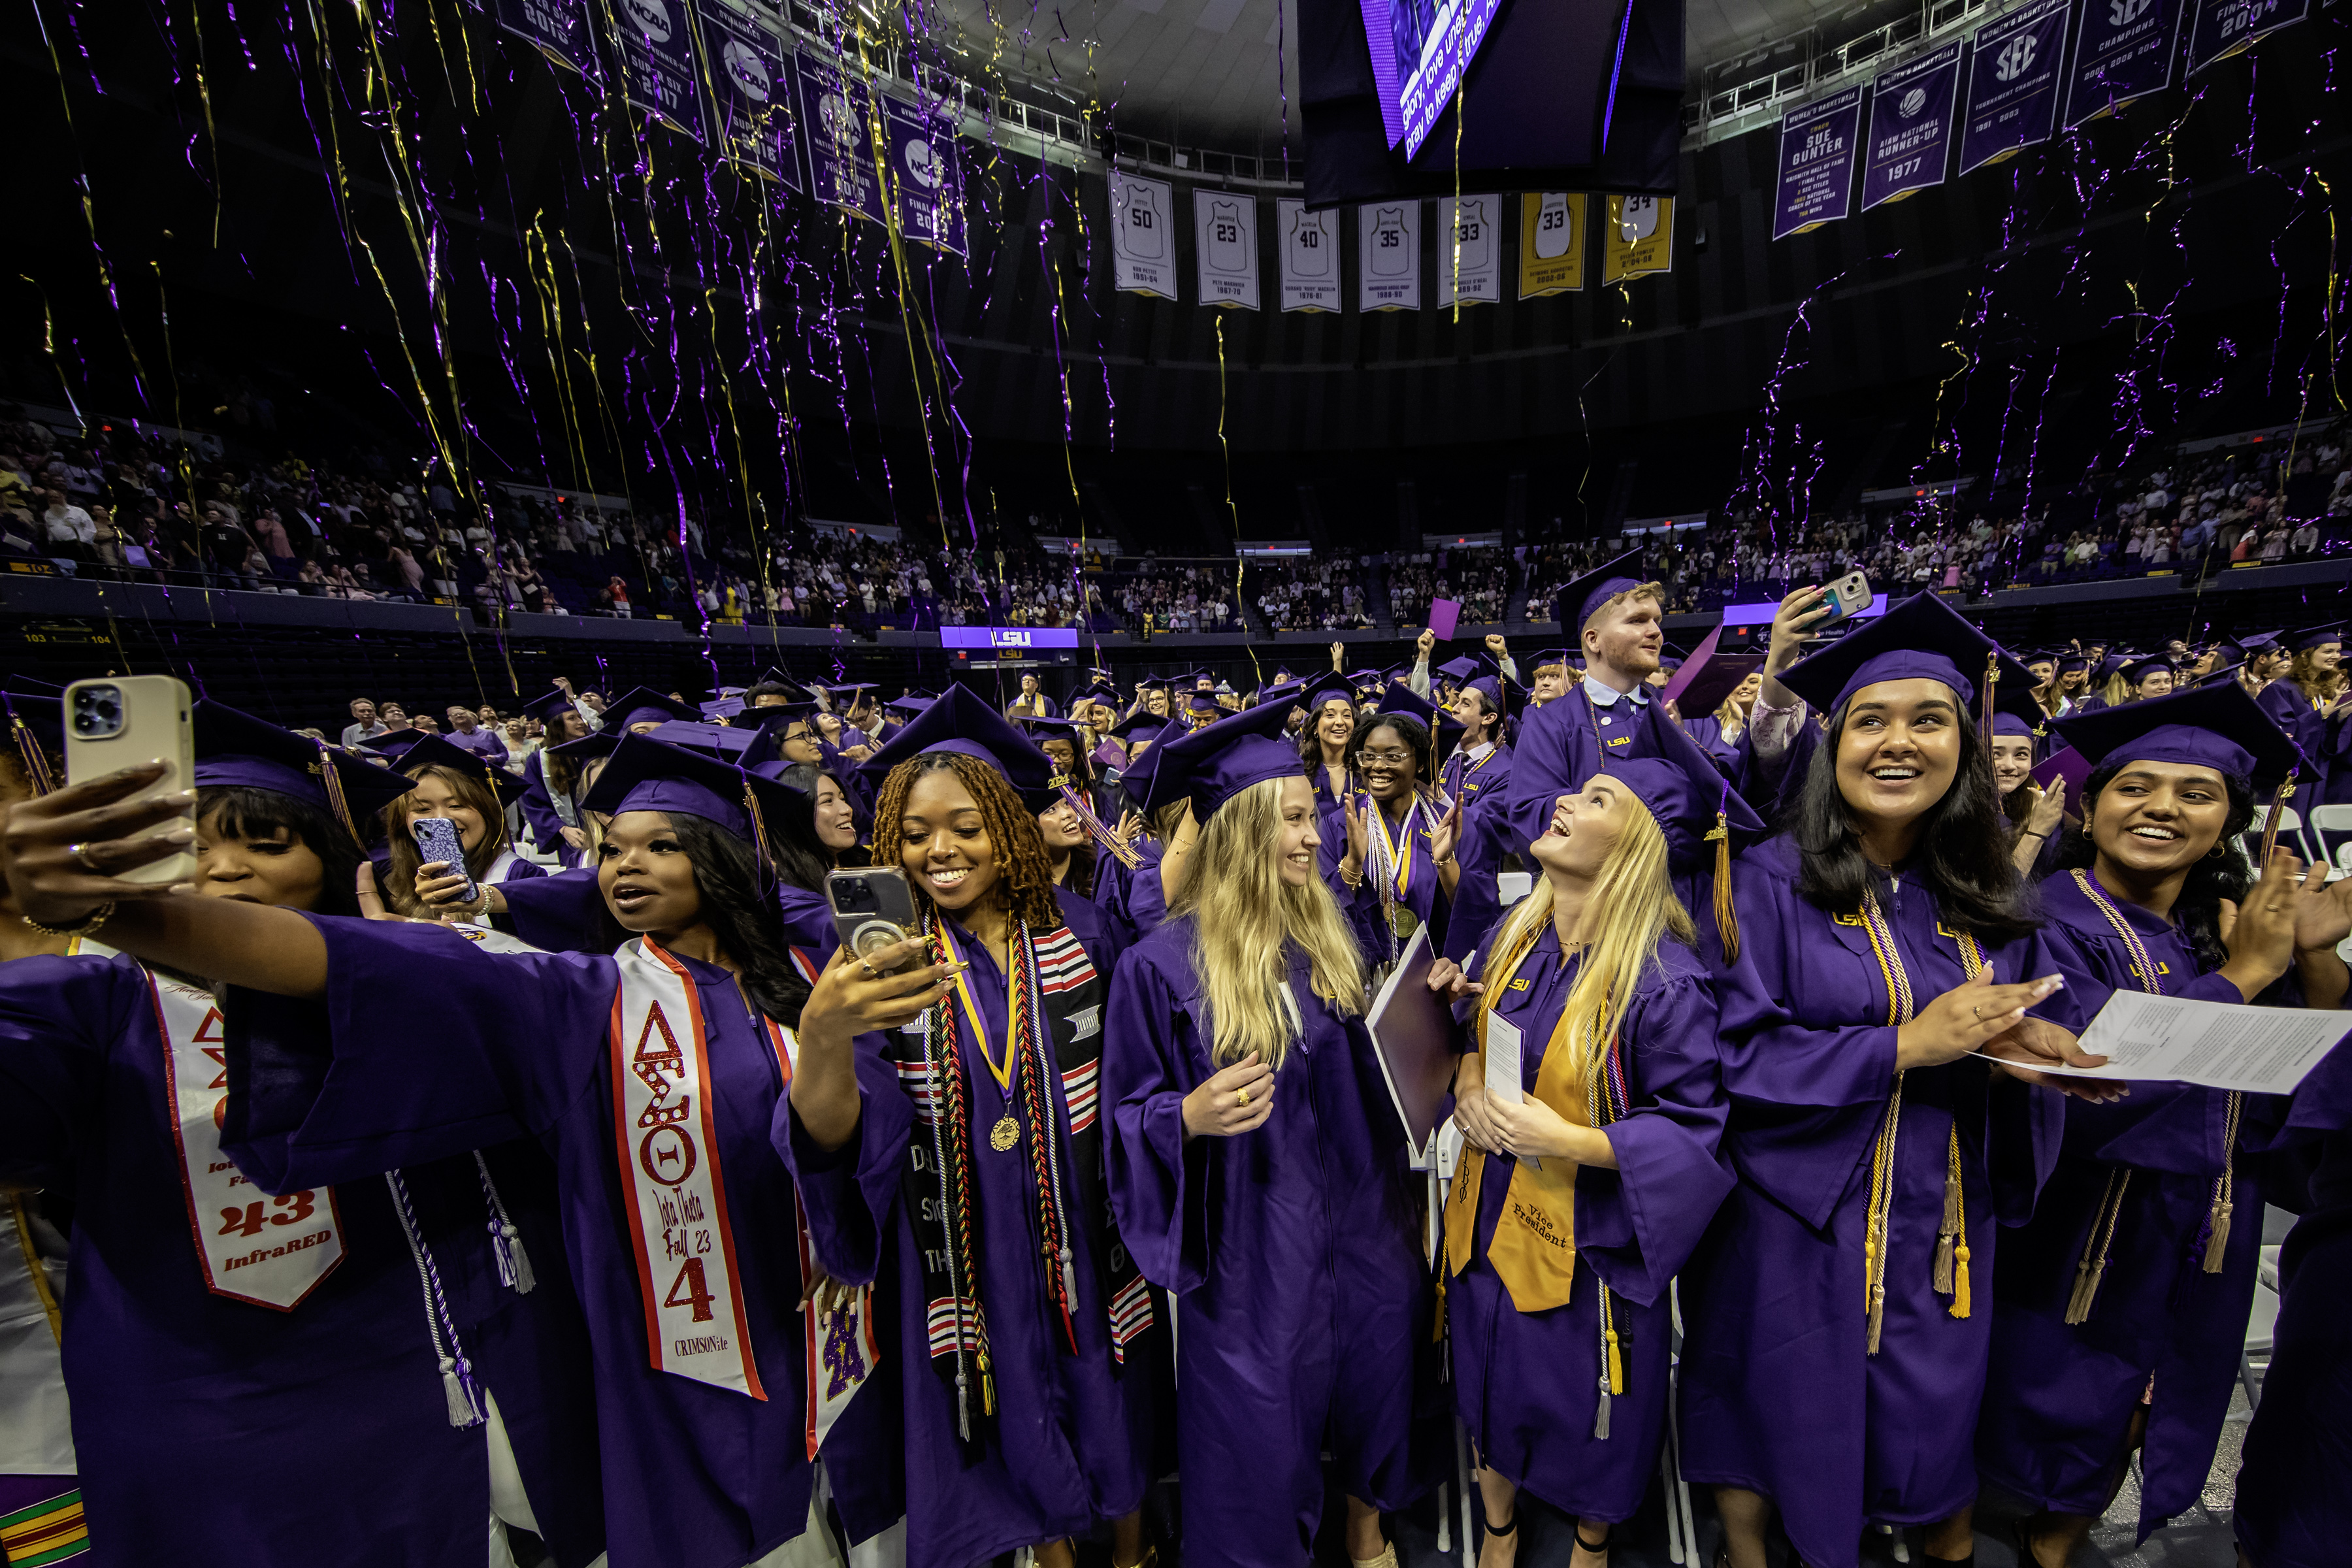 A group of graduates celebrates as streamers fall from the ceiling during commencement exercises.